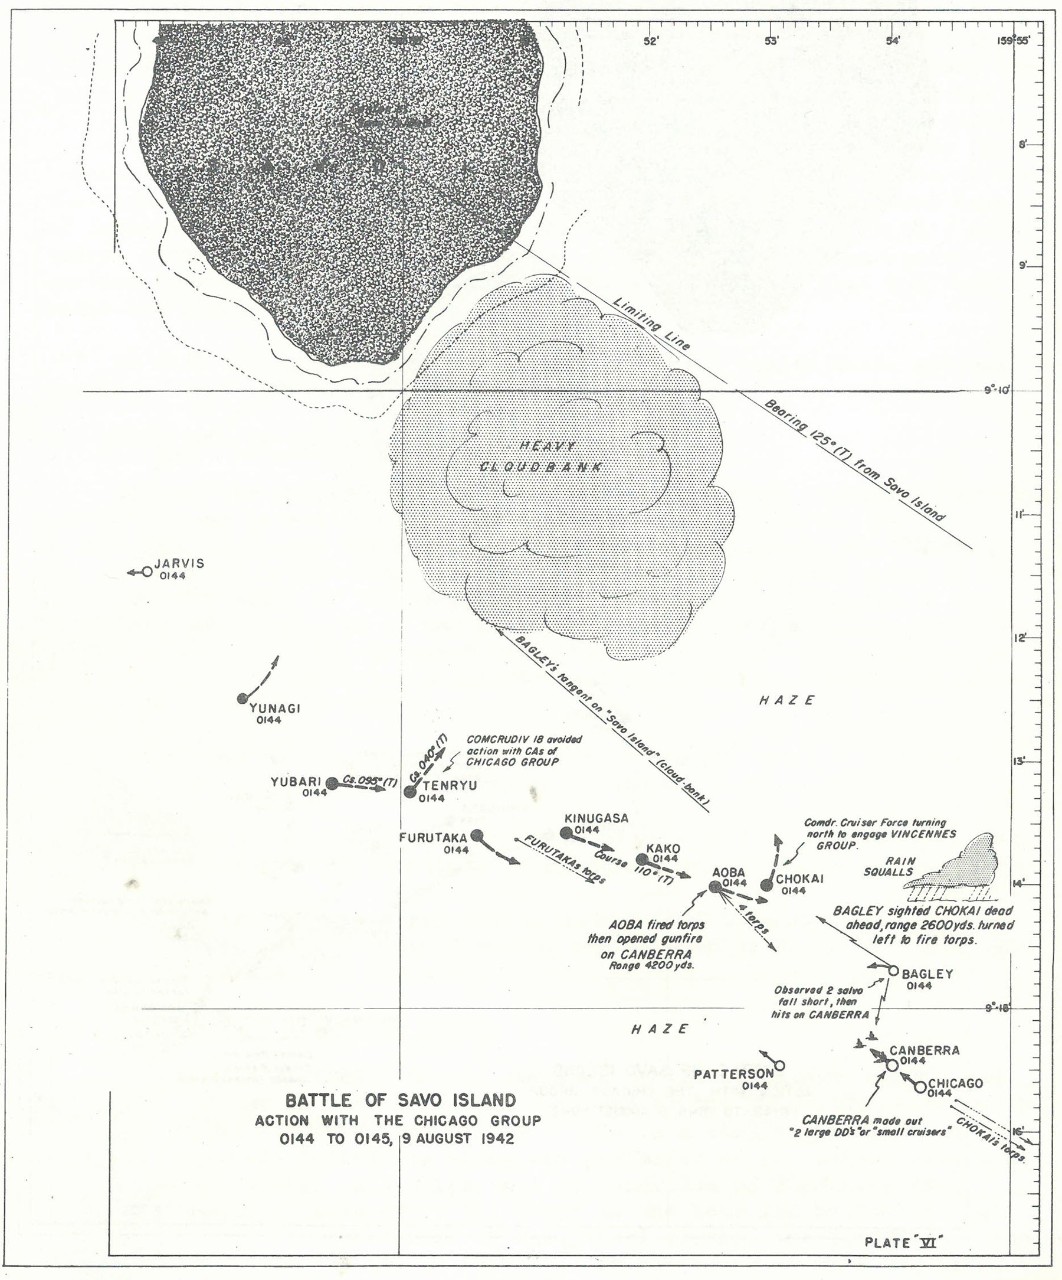 Plate 6: Battle of Savo Island, Action with the CHICAGO Group, 0144 to 0145, 9 August 1942 - chart - The Battle of Savo Island August 9, 1942 Strategical and Tactical Analysis